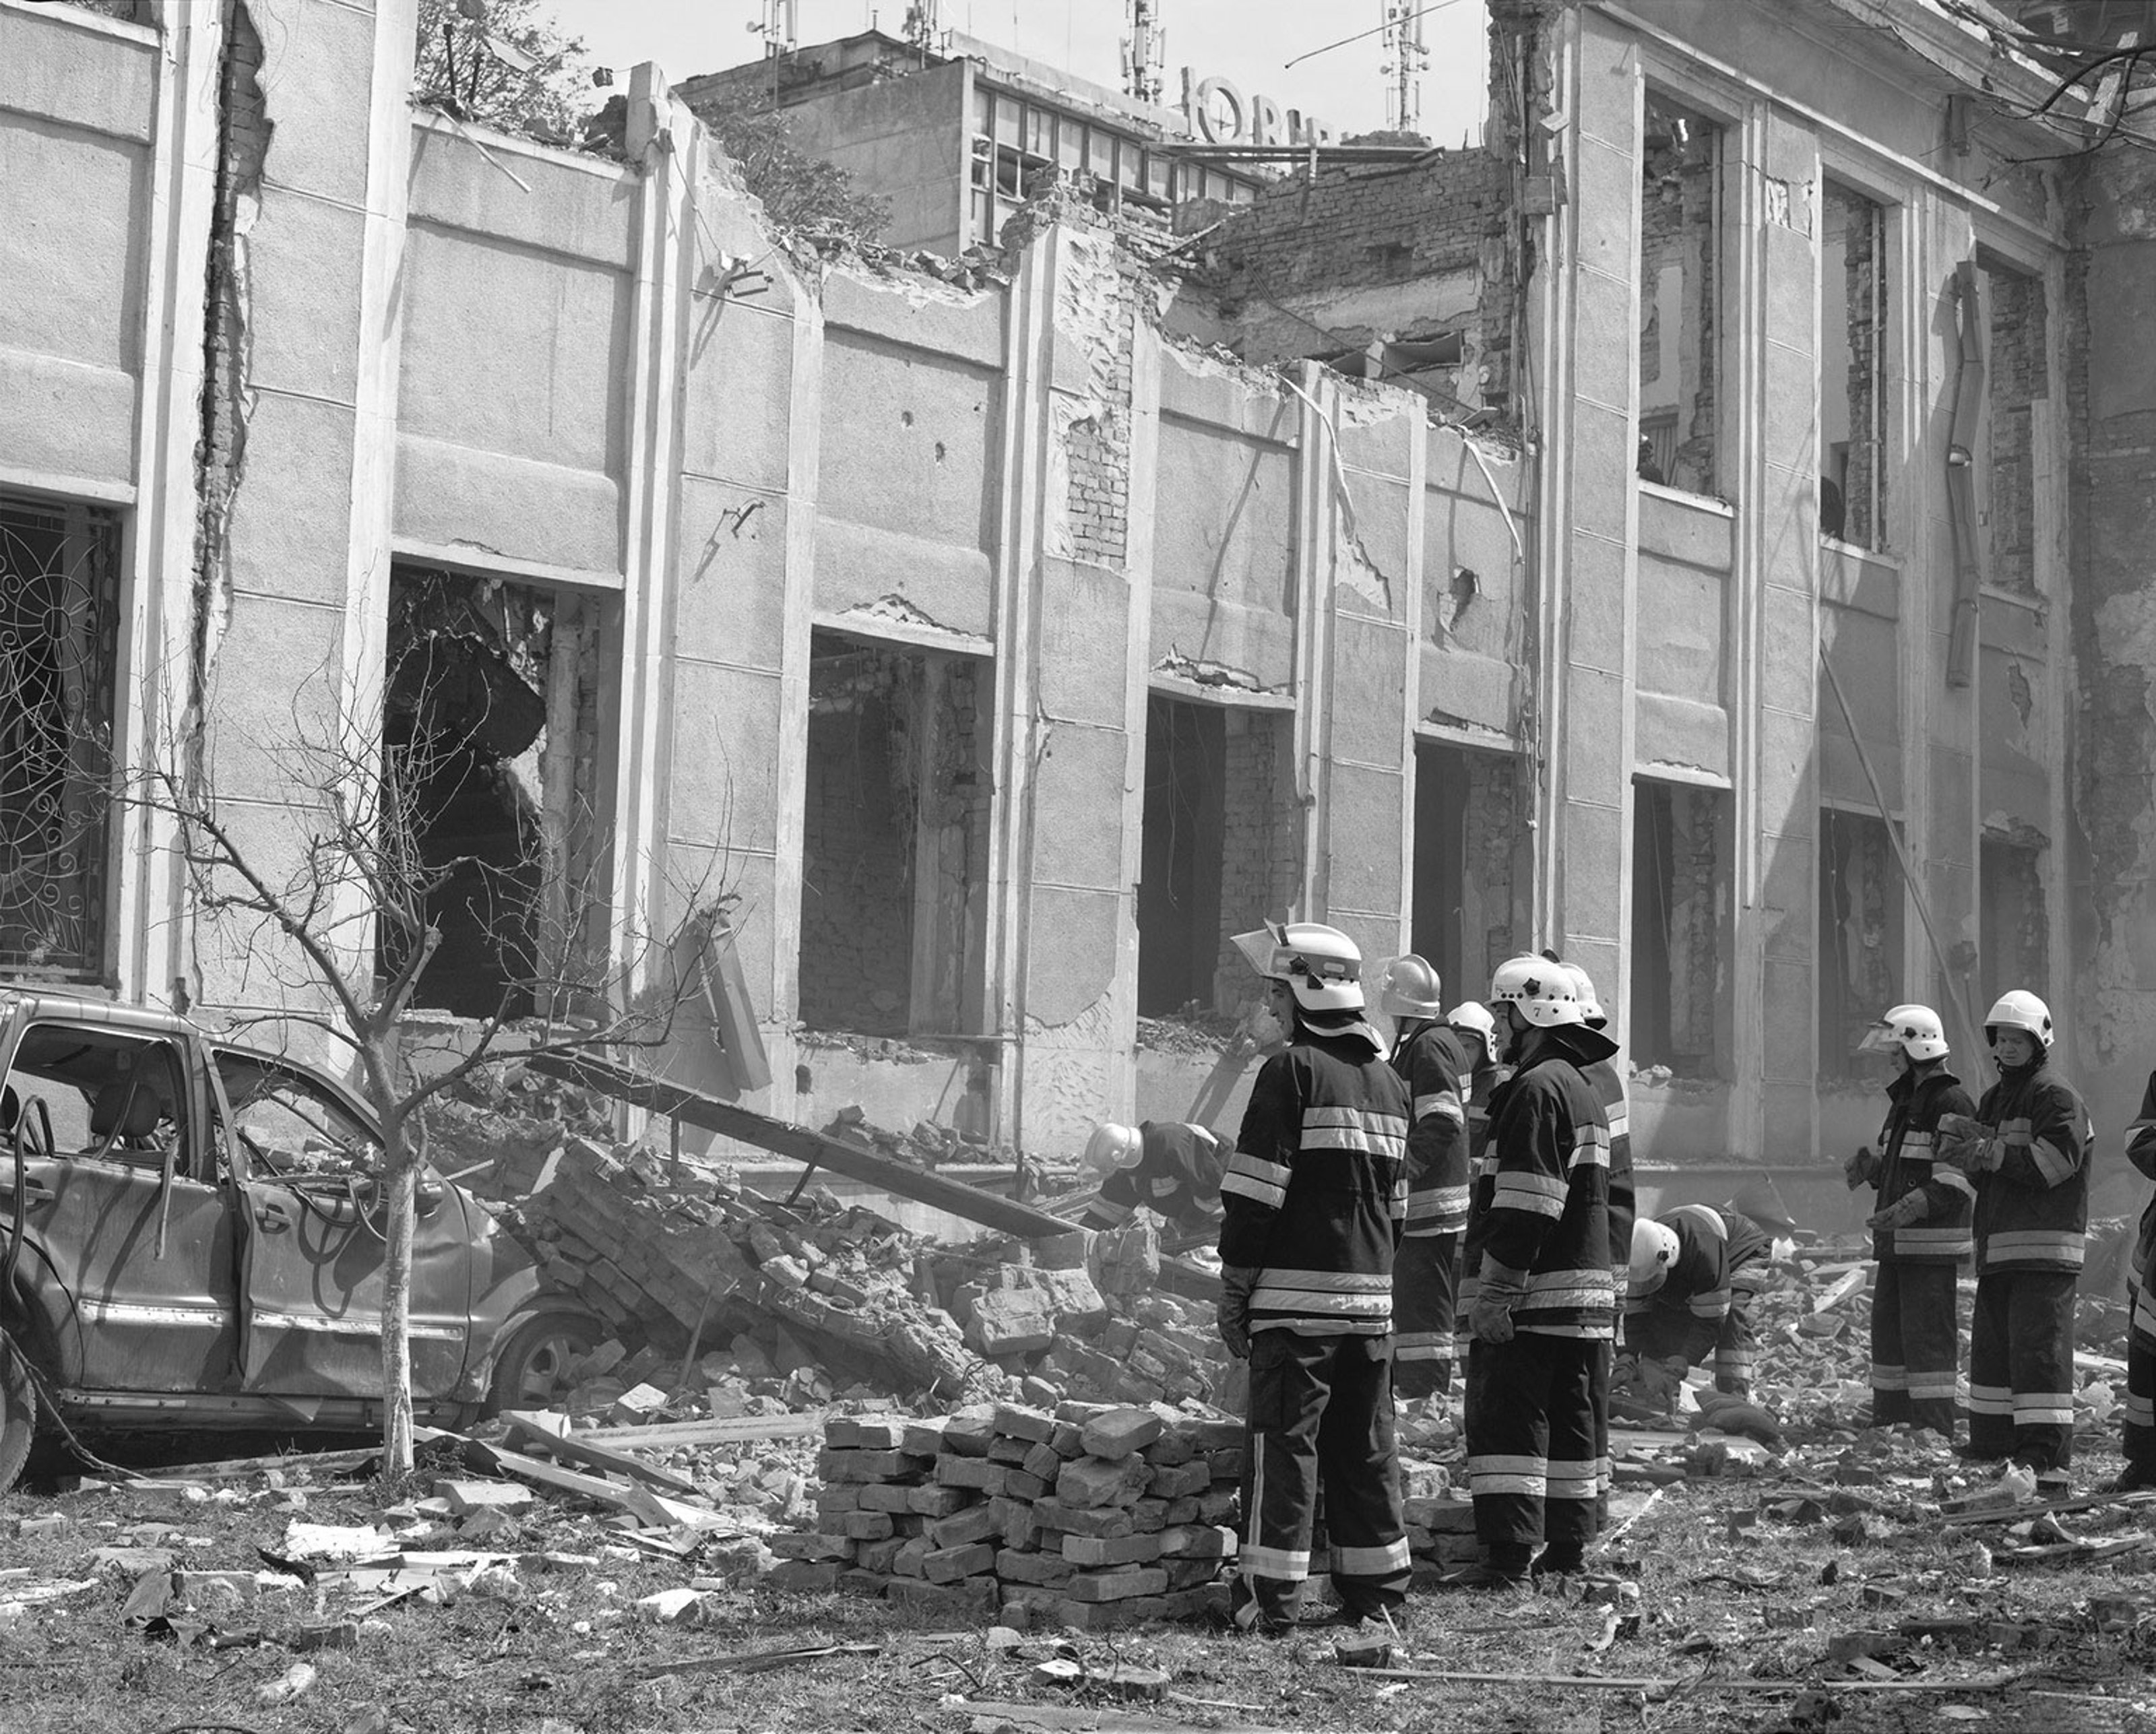 A black and white photography by Yana Kononova. A group of firefighters standing in front of a war-ravaged building.